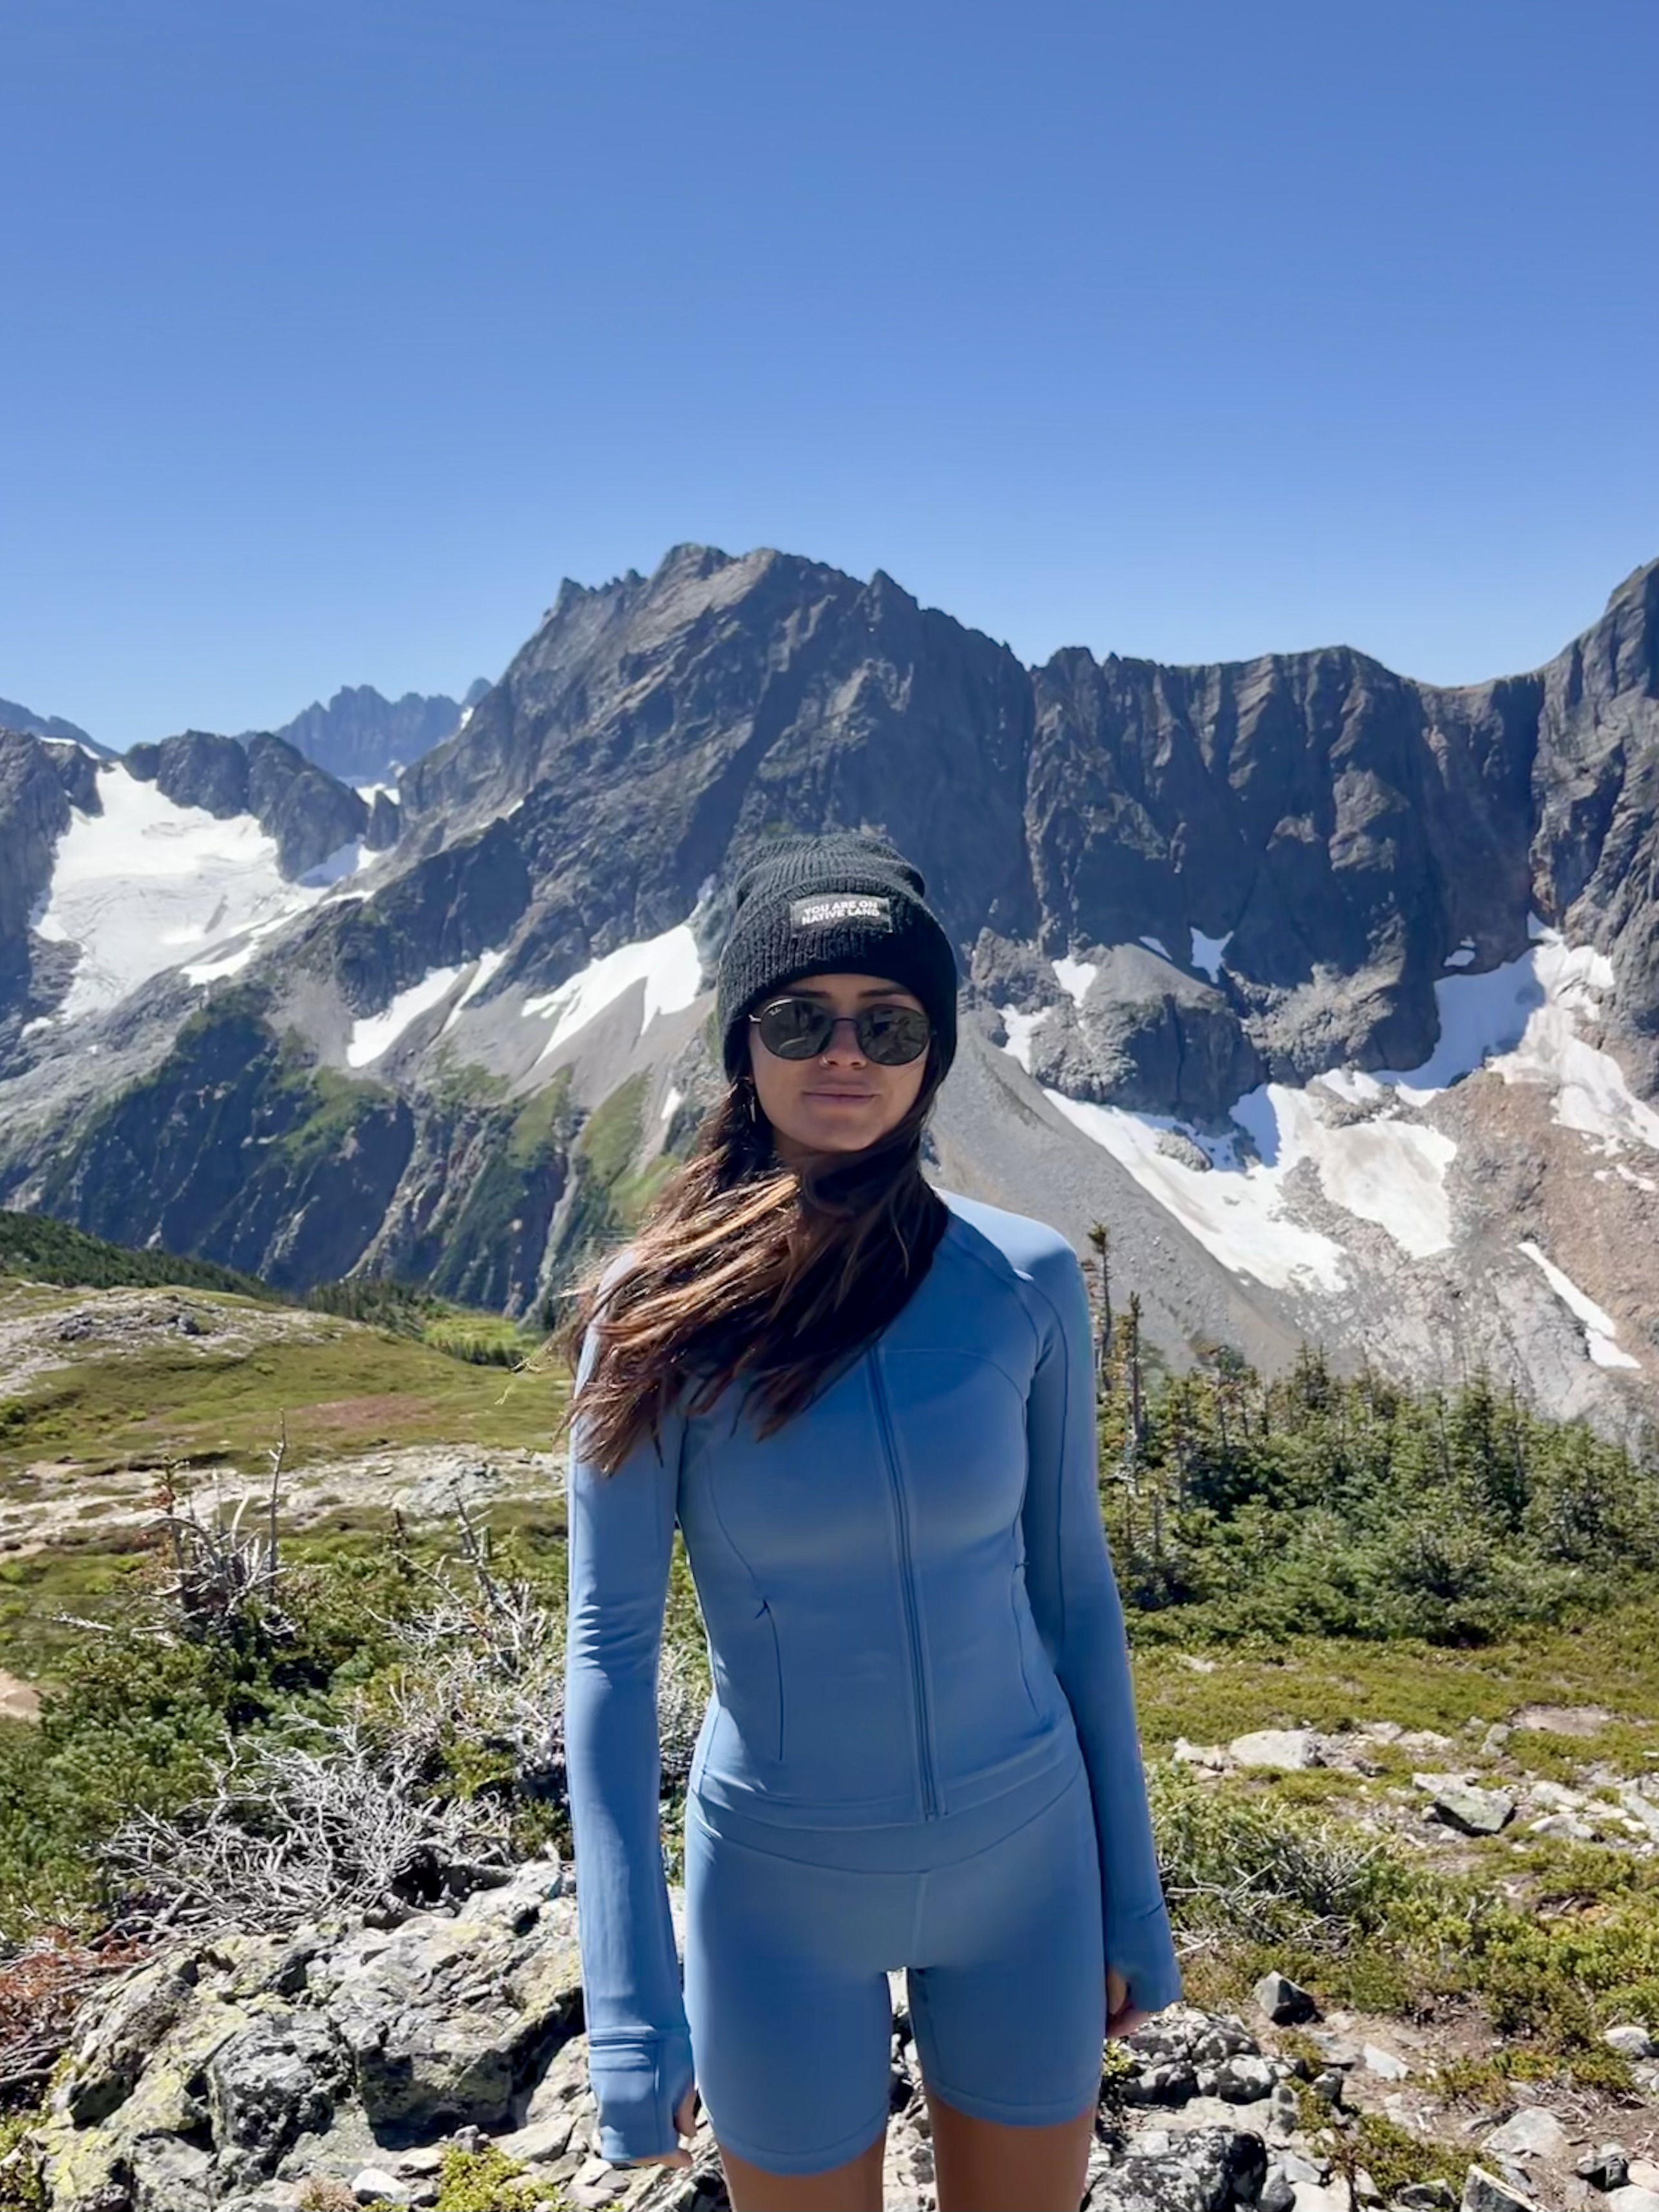 Izabella Ruffino wears hiking clothes and stands in front of snowcapped mountains.